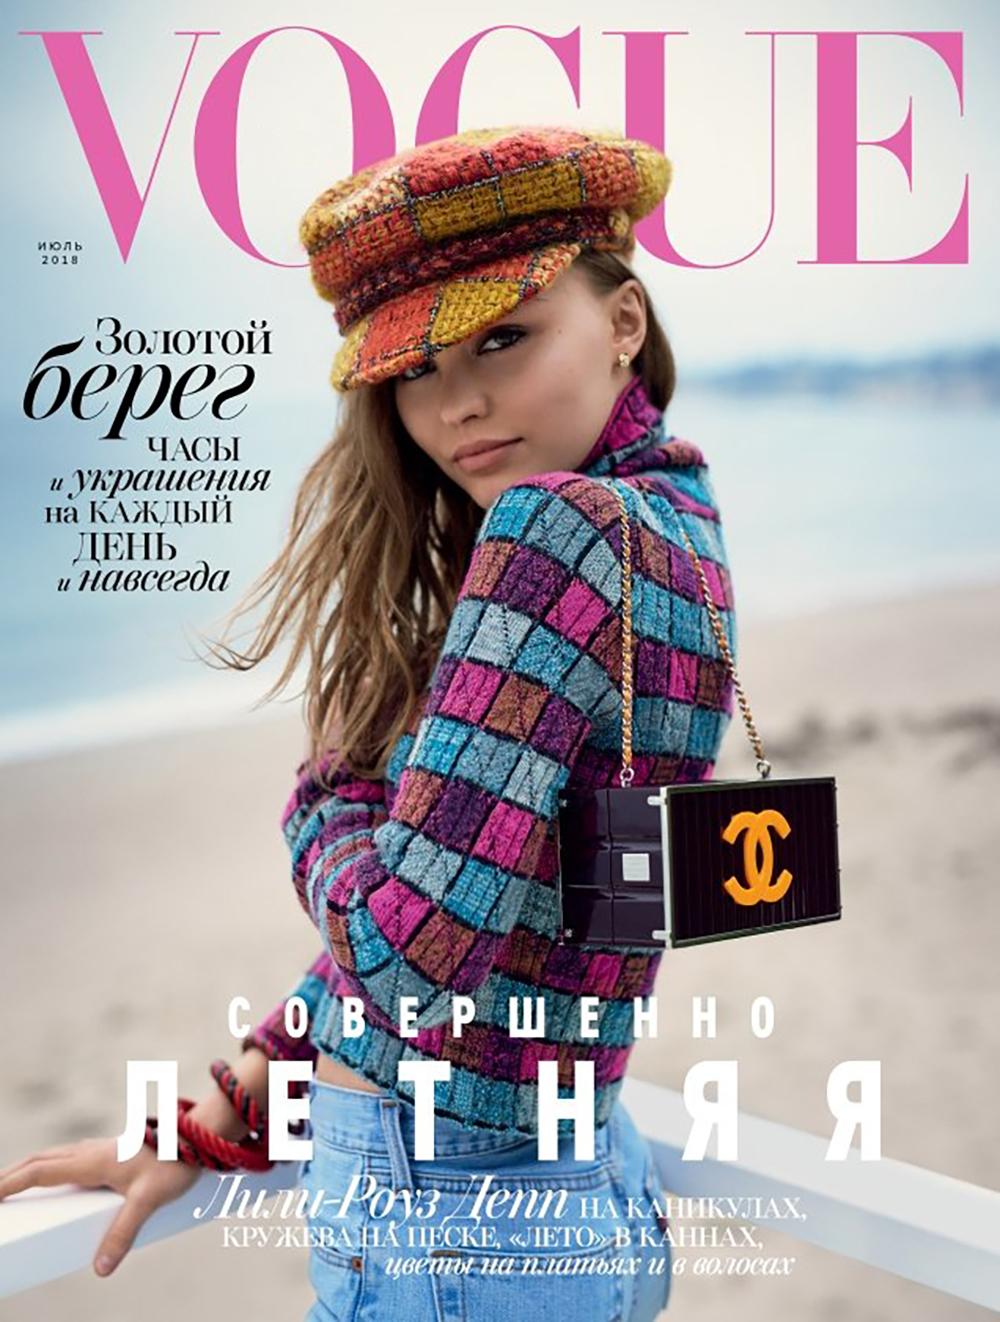 Chanel New Lily Rose Depp Style Vogue Cover Knit Dress For Sale 2